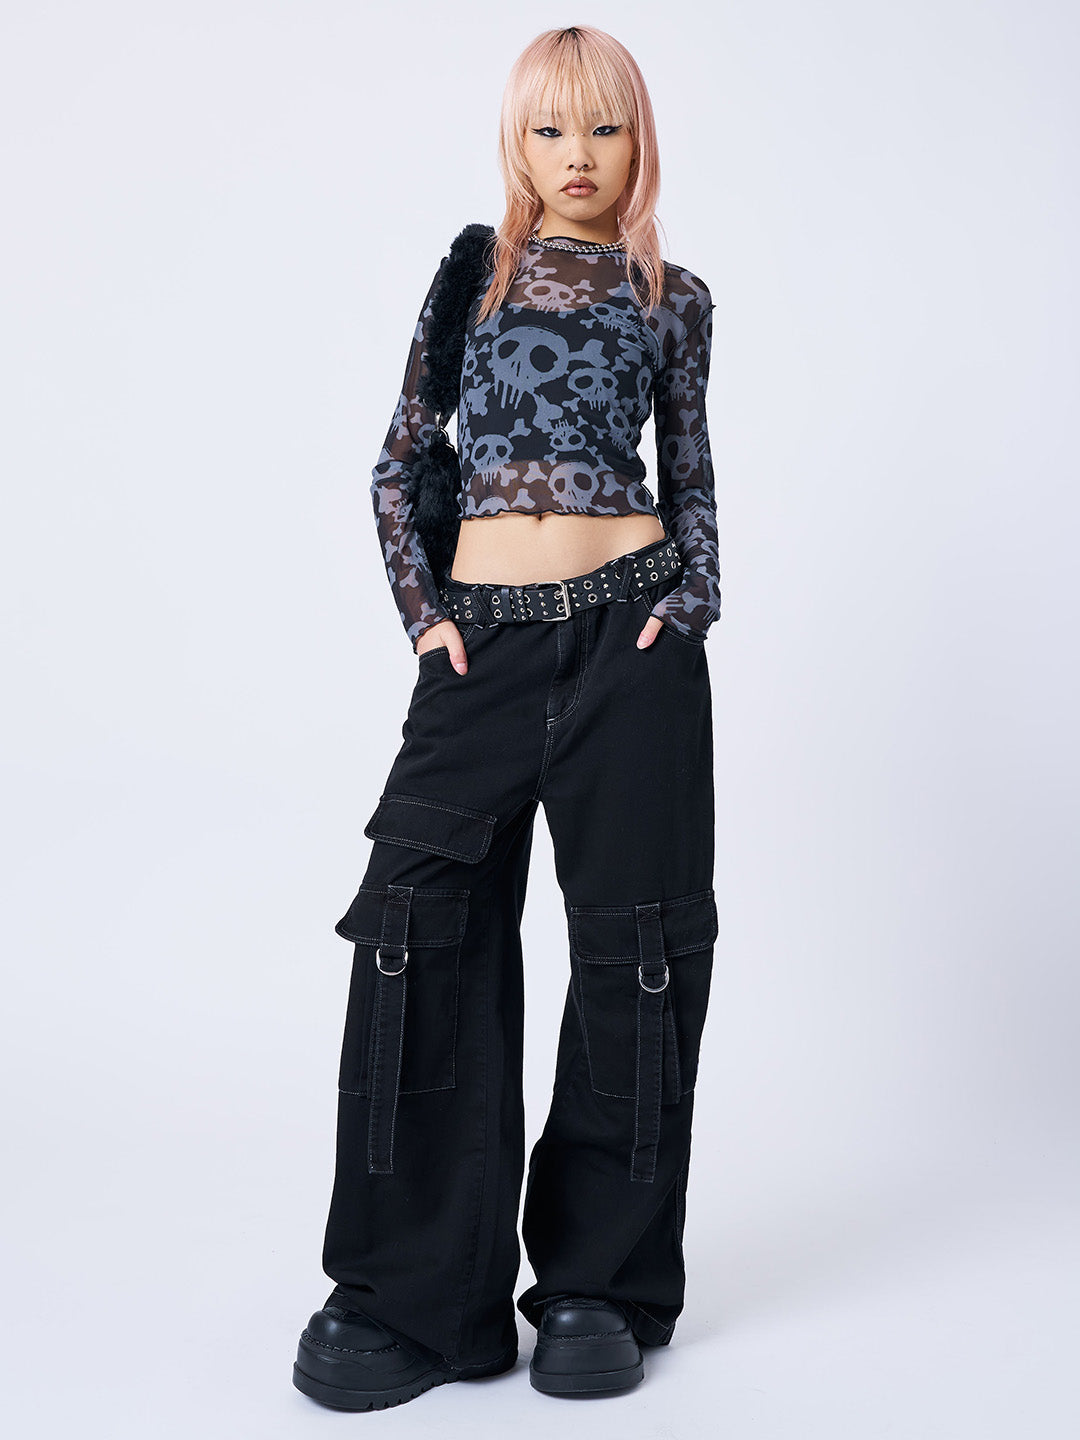 Y2K Grunge Black Cargo Pants with Utility Pockets